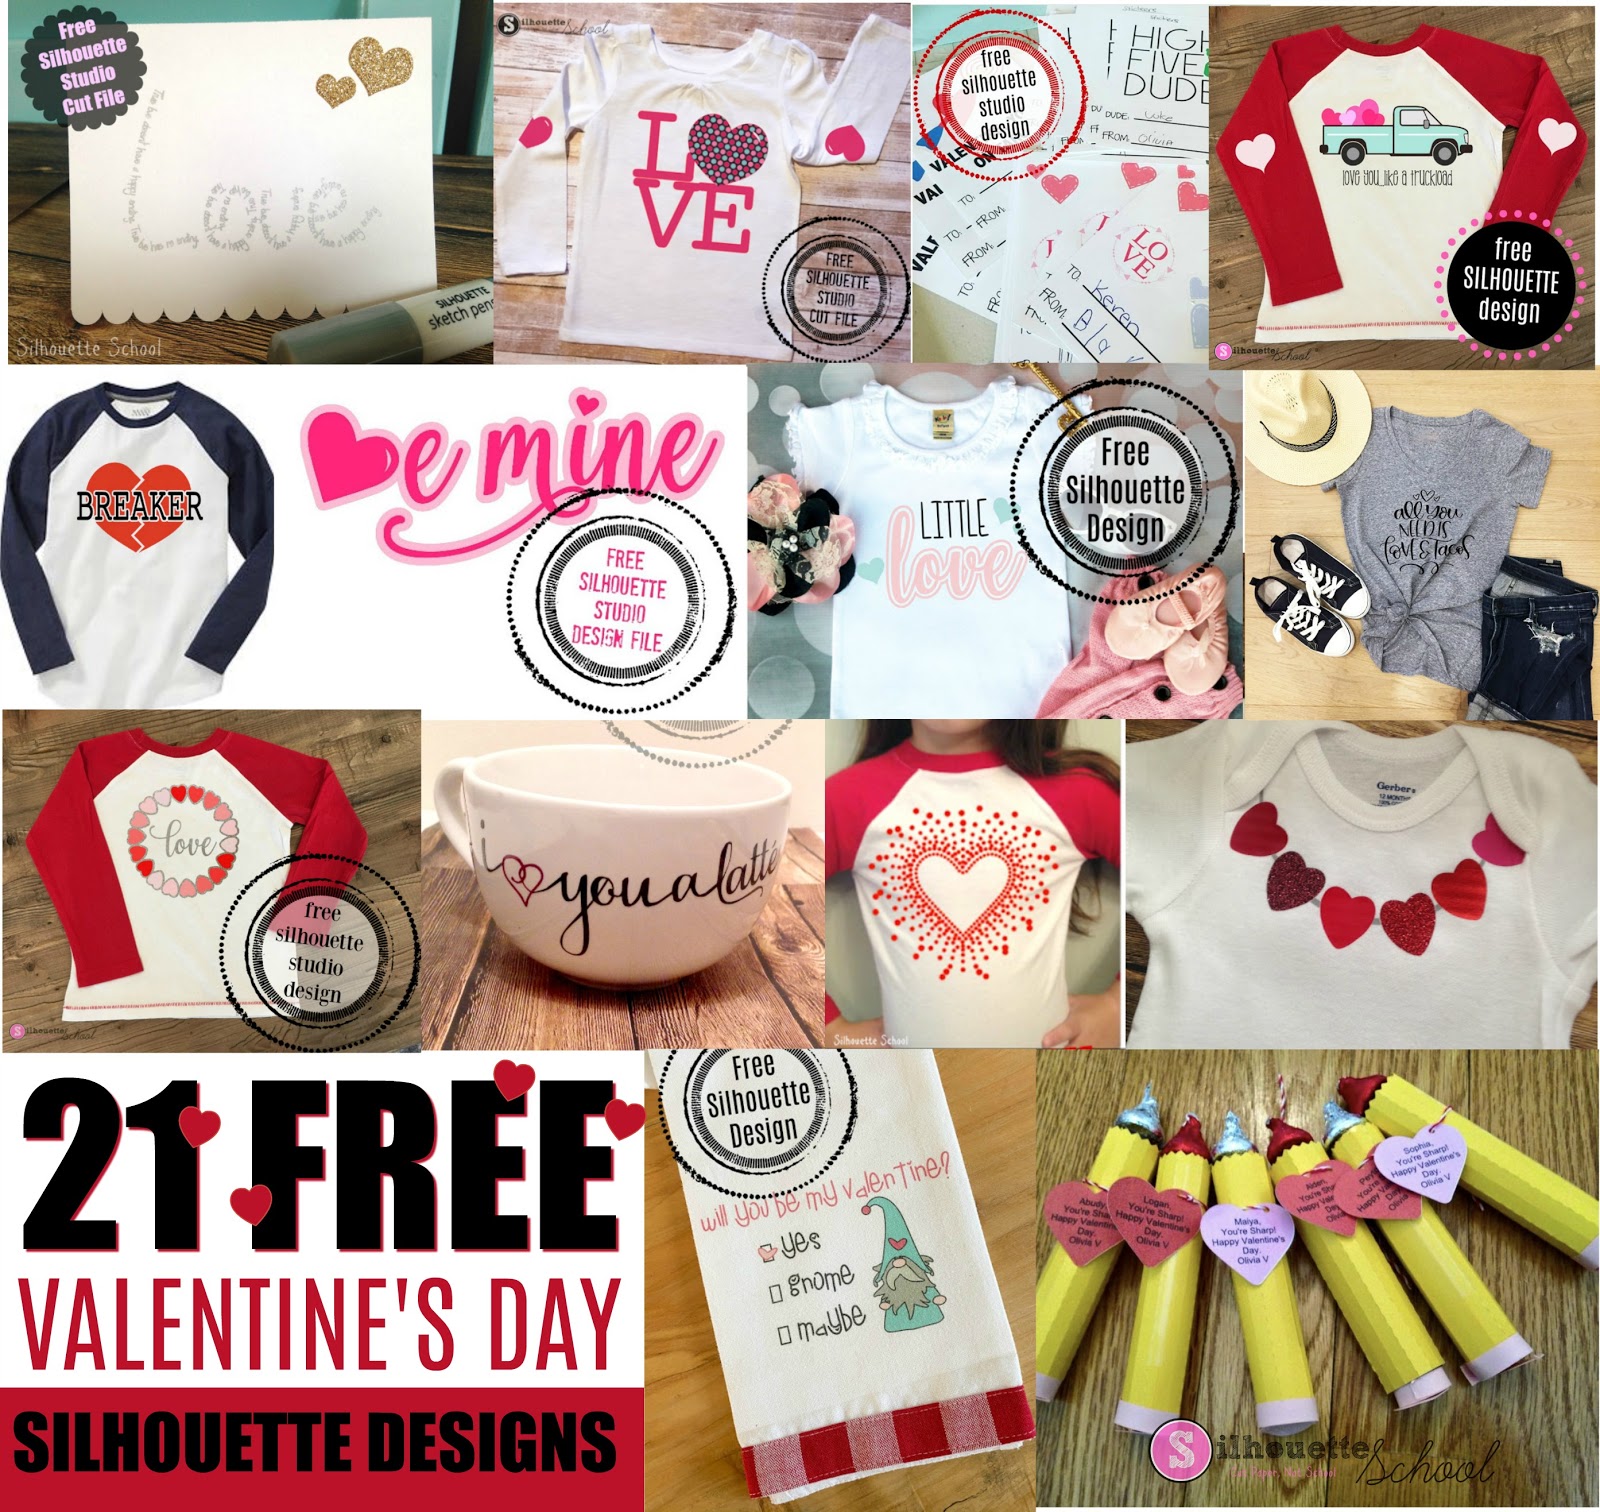 Download 21 Free Valentines Designs For Silhouette Free Svg Files Too Silhouette School